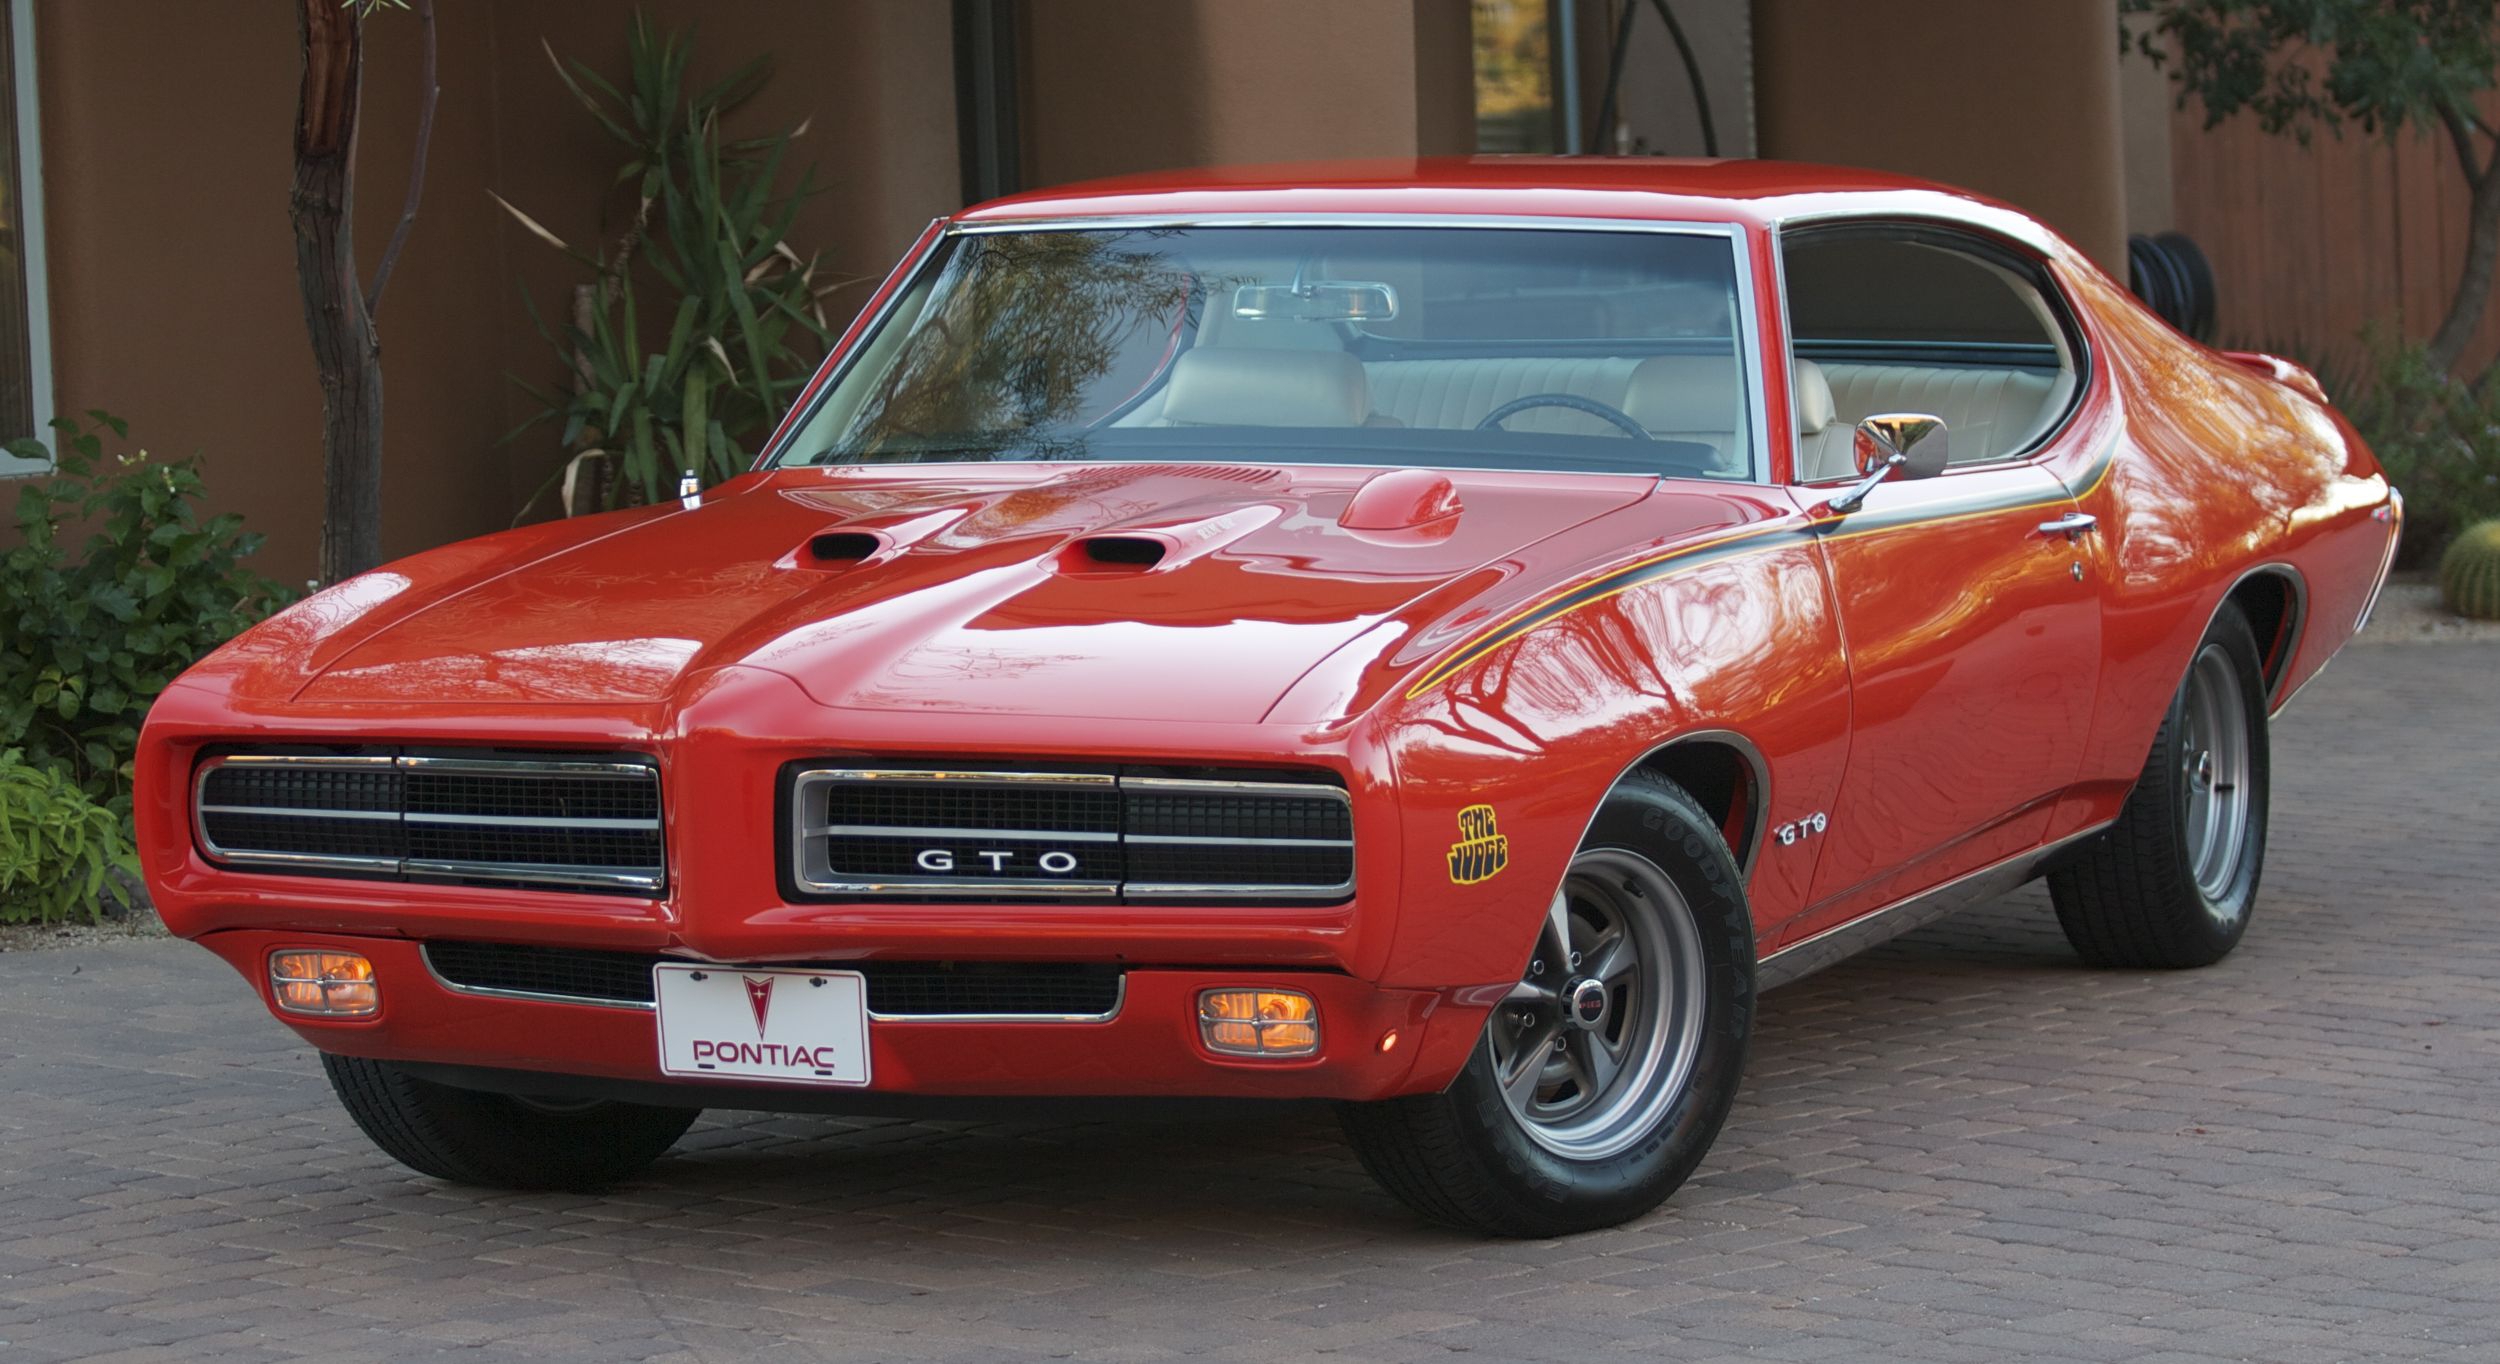 Pontiac GTO Wallpapers Images Photos Pictures Backgrounds